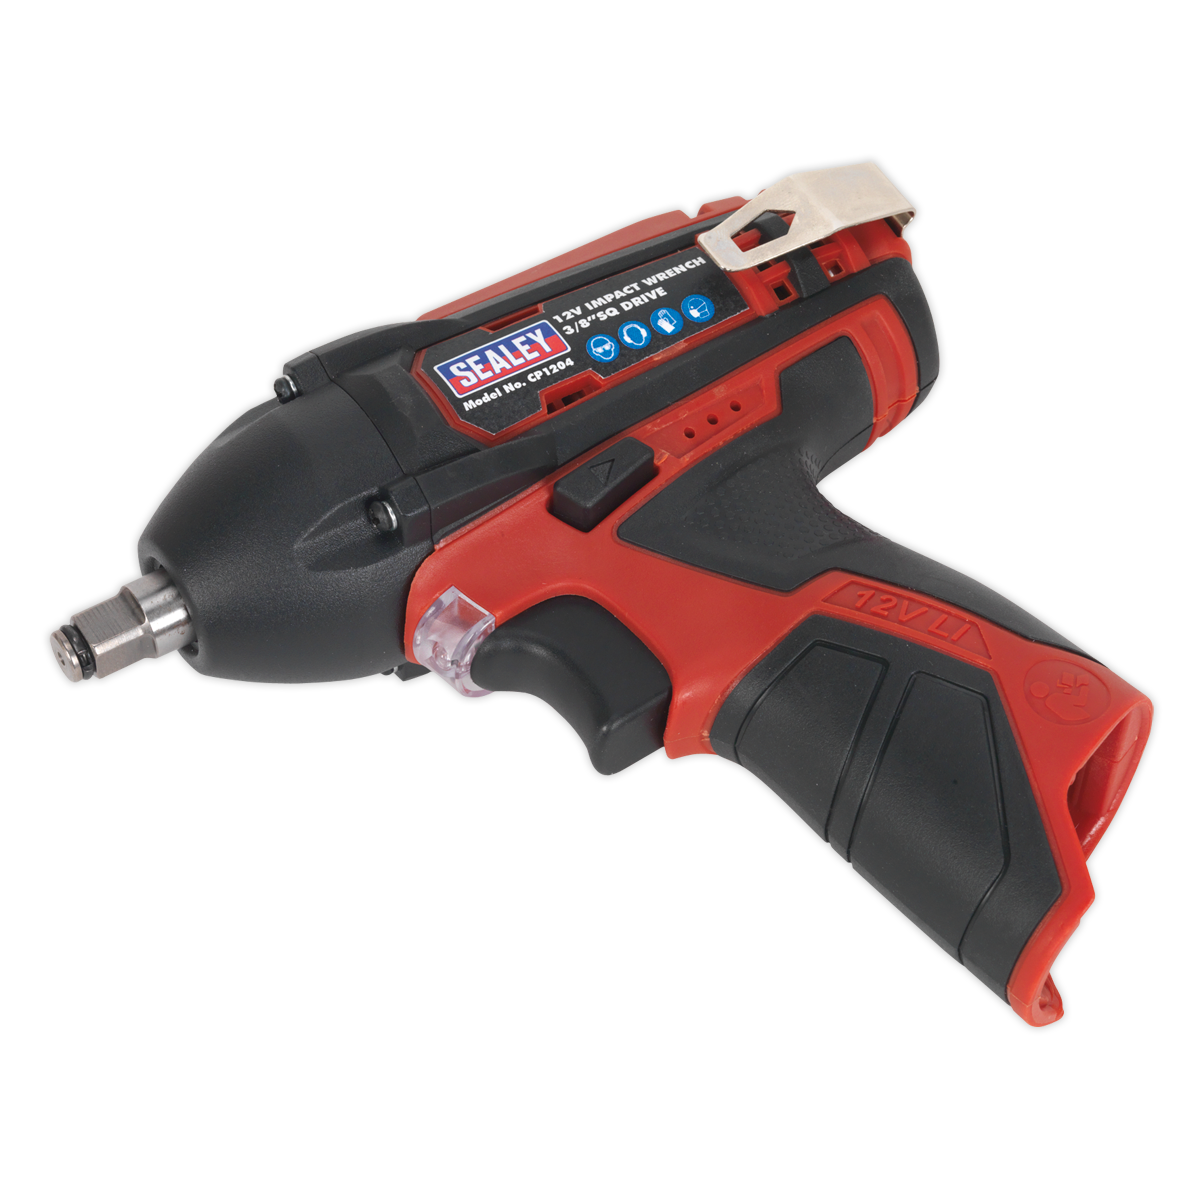 Sealey CP1204 Cordless Impact Wrench 3/8"Sq Drive 80Nm 12V Li-ion - Body Only